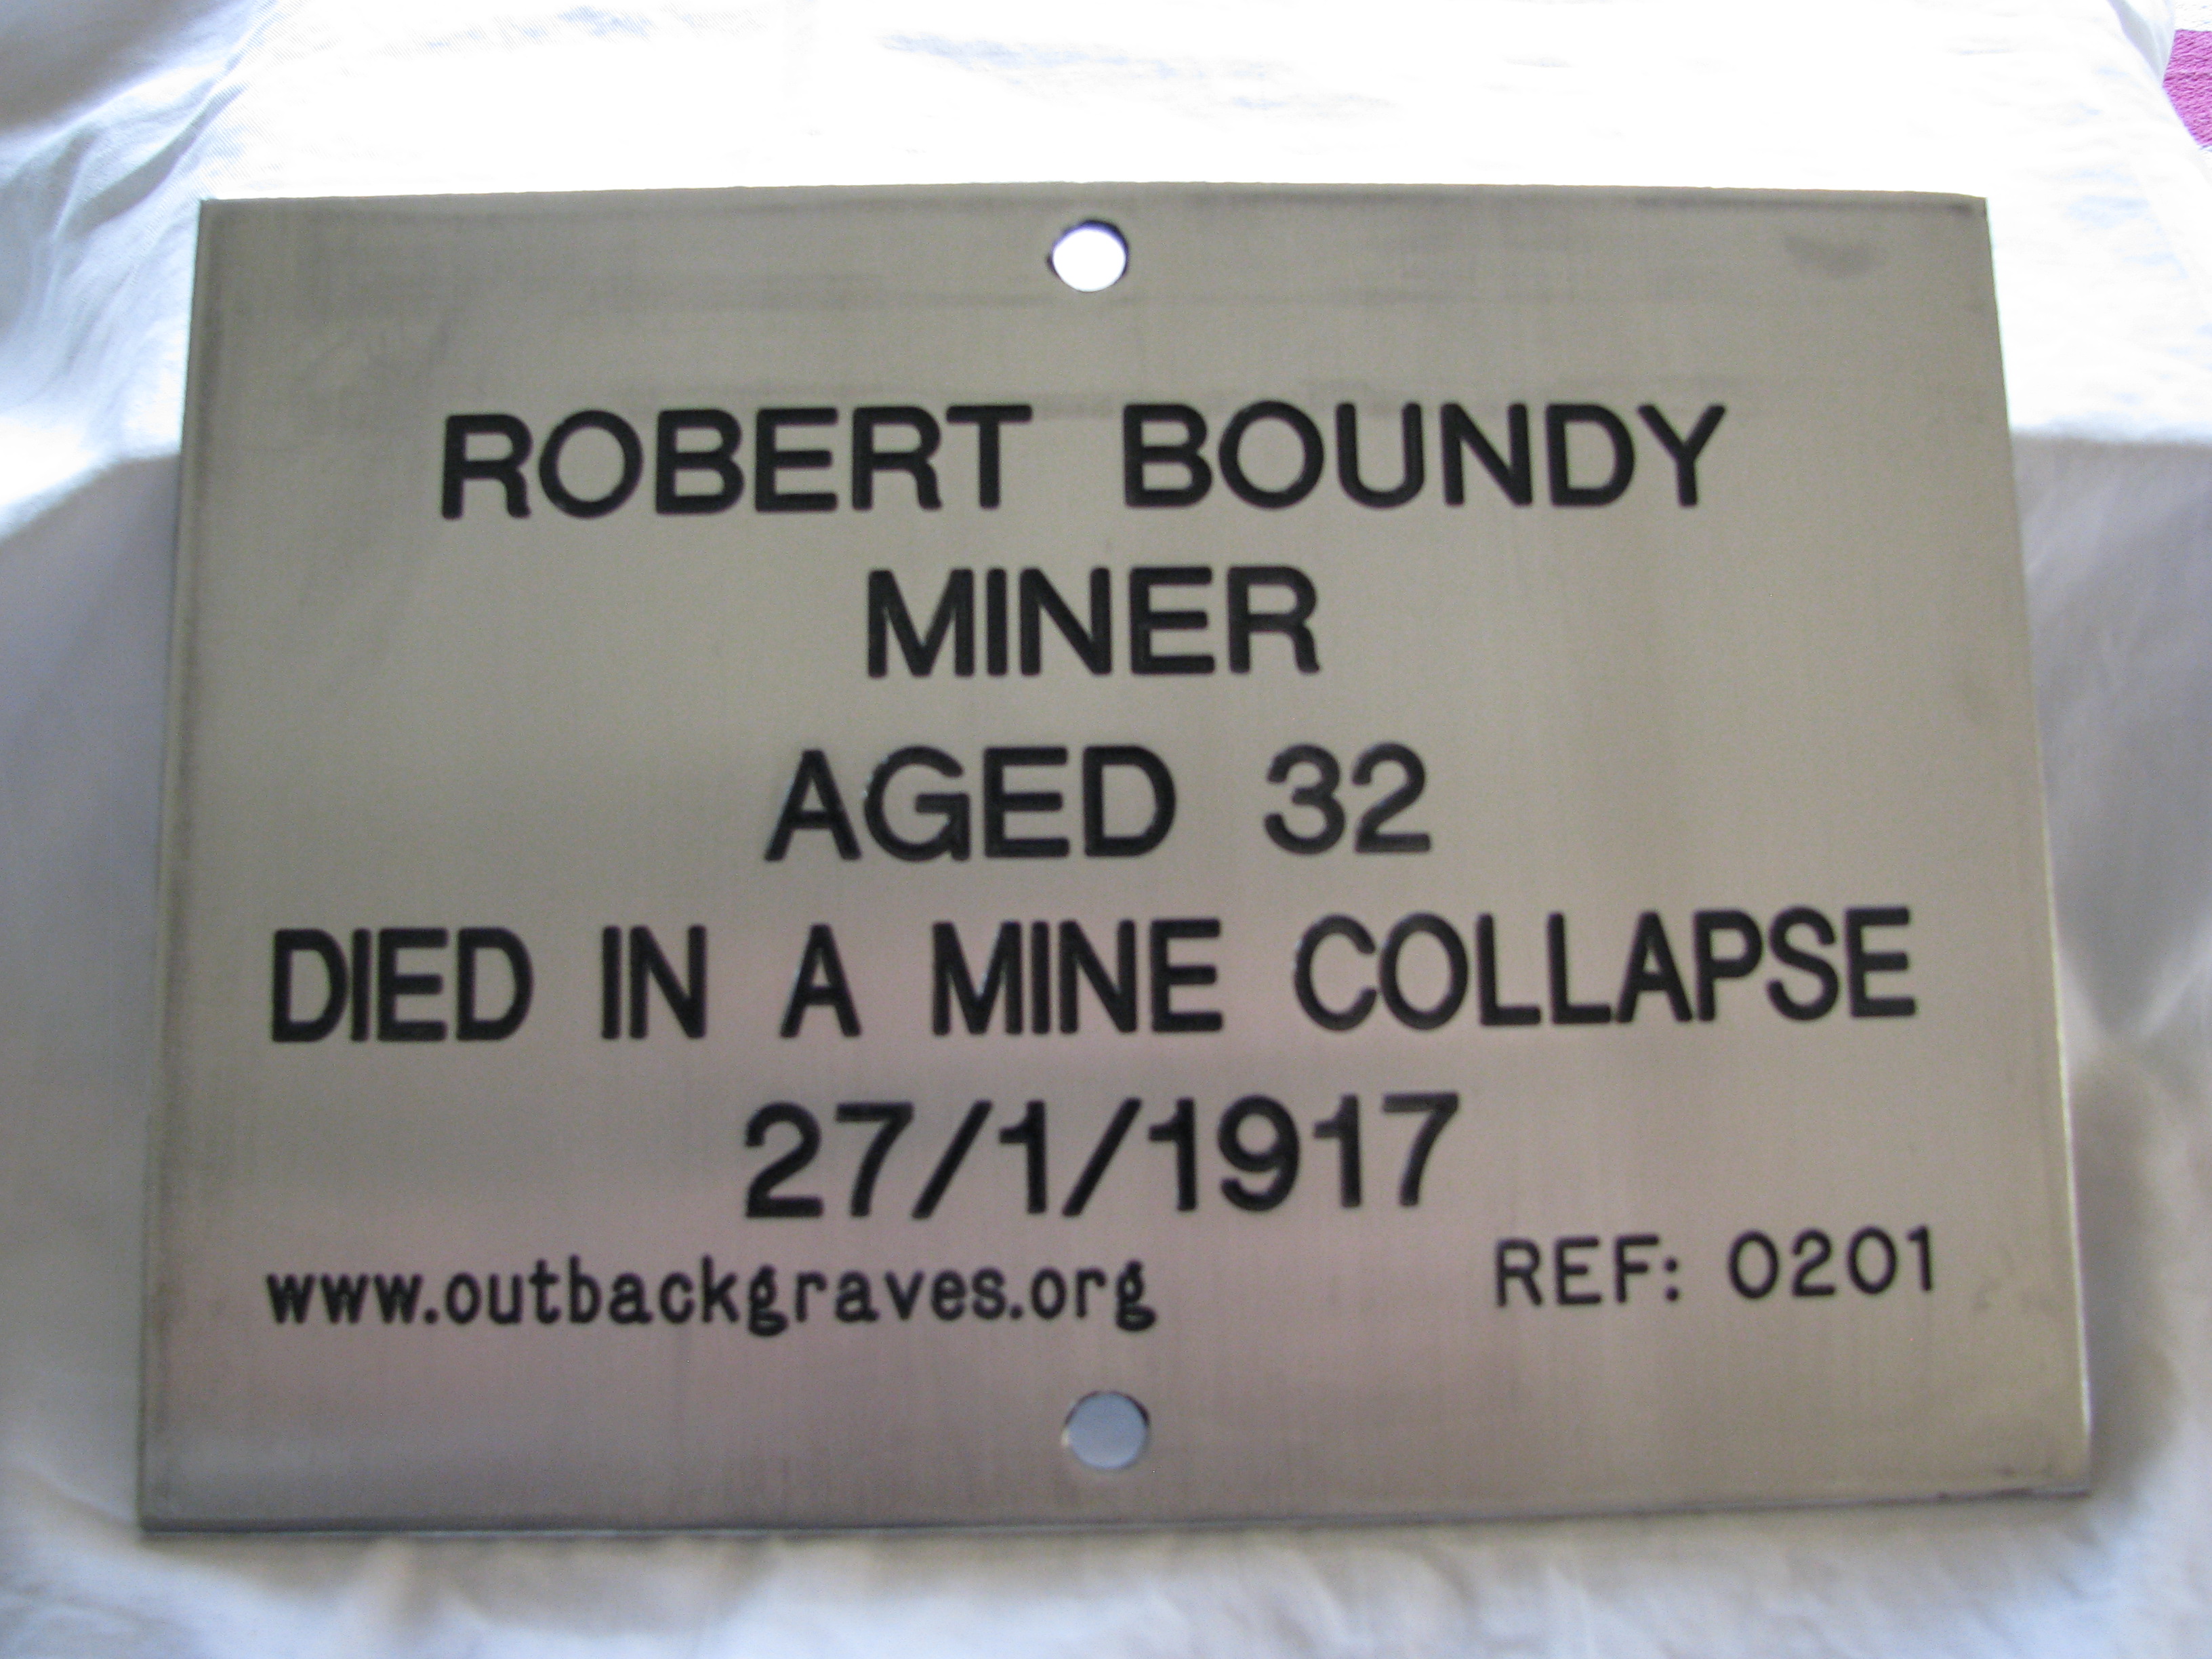 This is a photograph of plaque number 201 for ROBERT BOUNDY at MULLINE